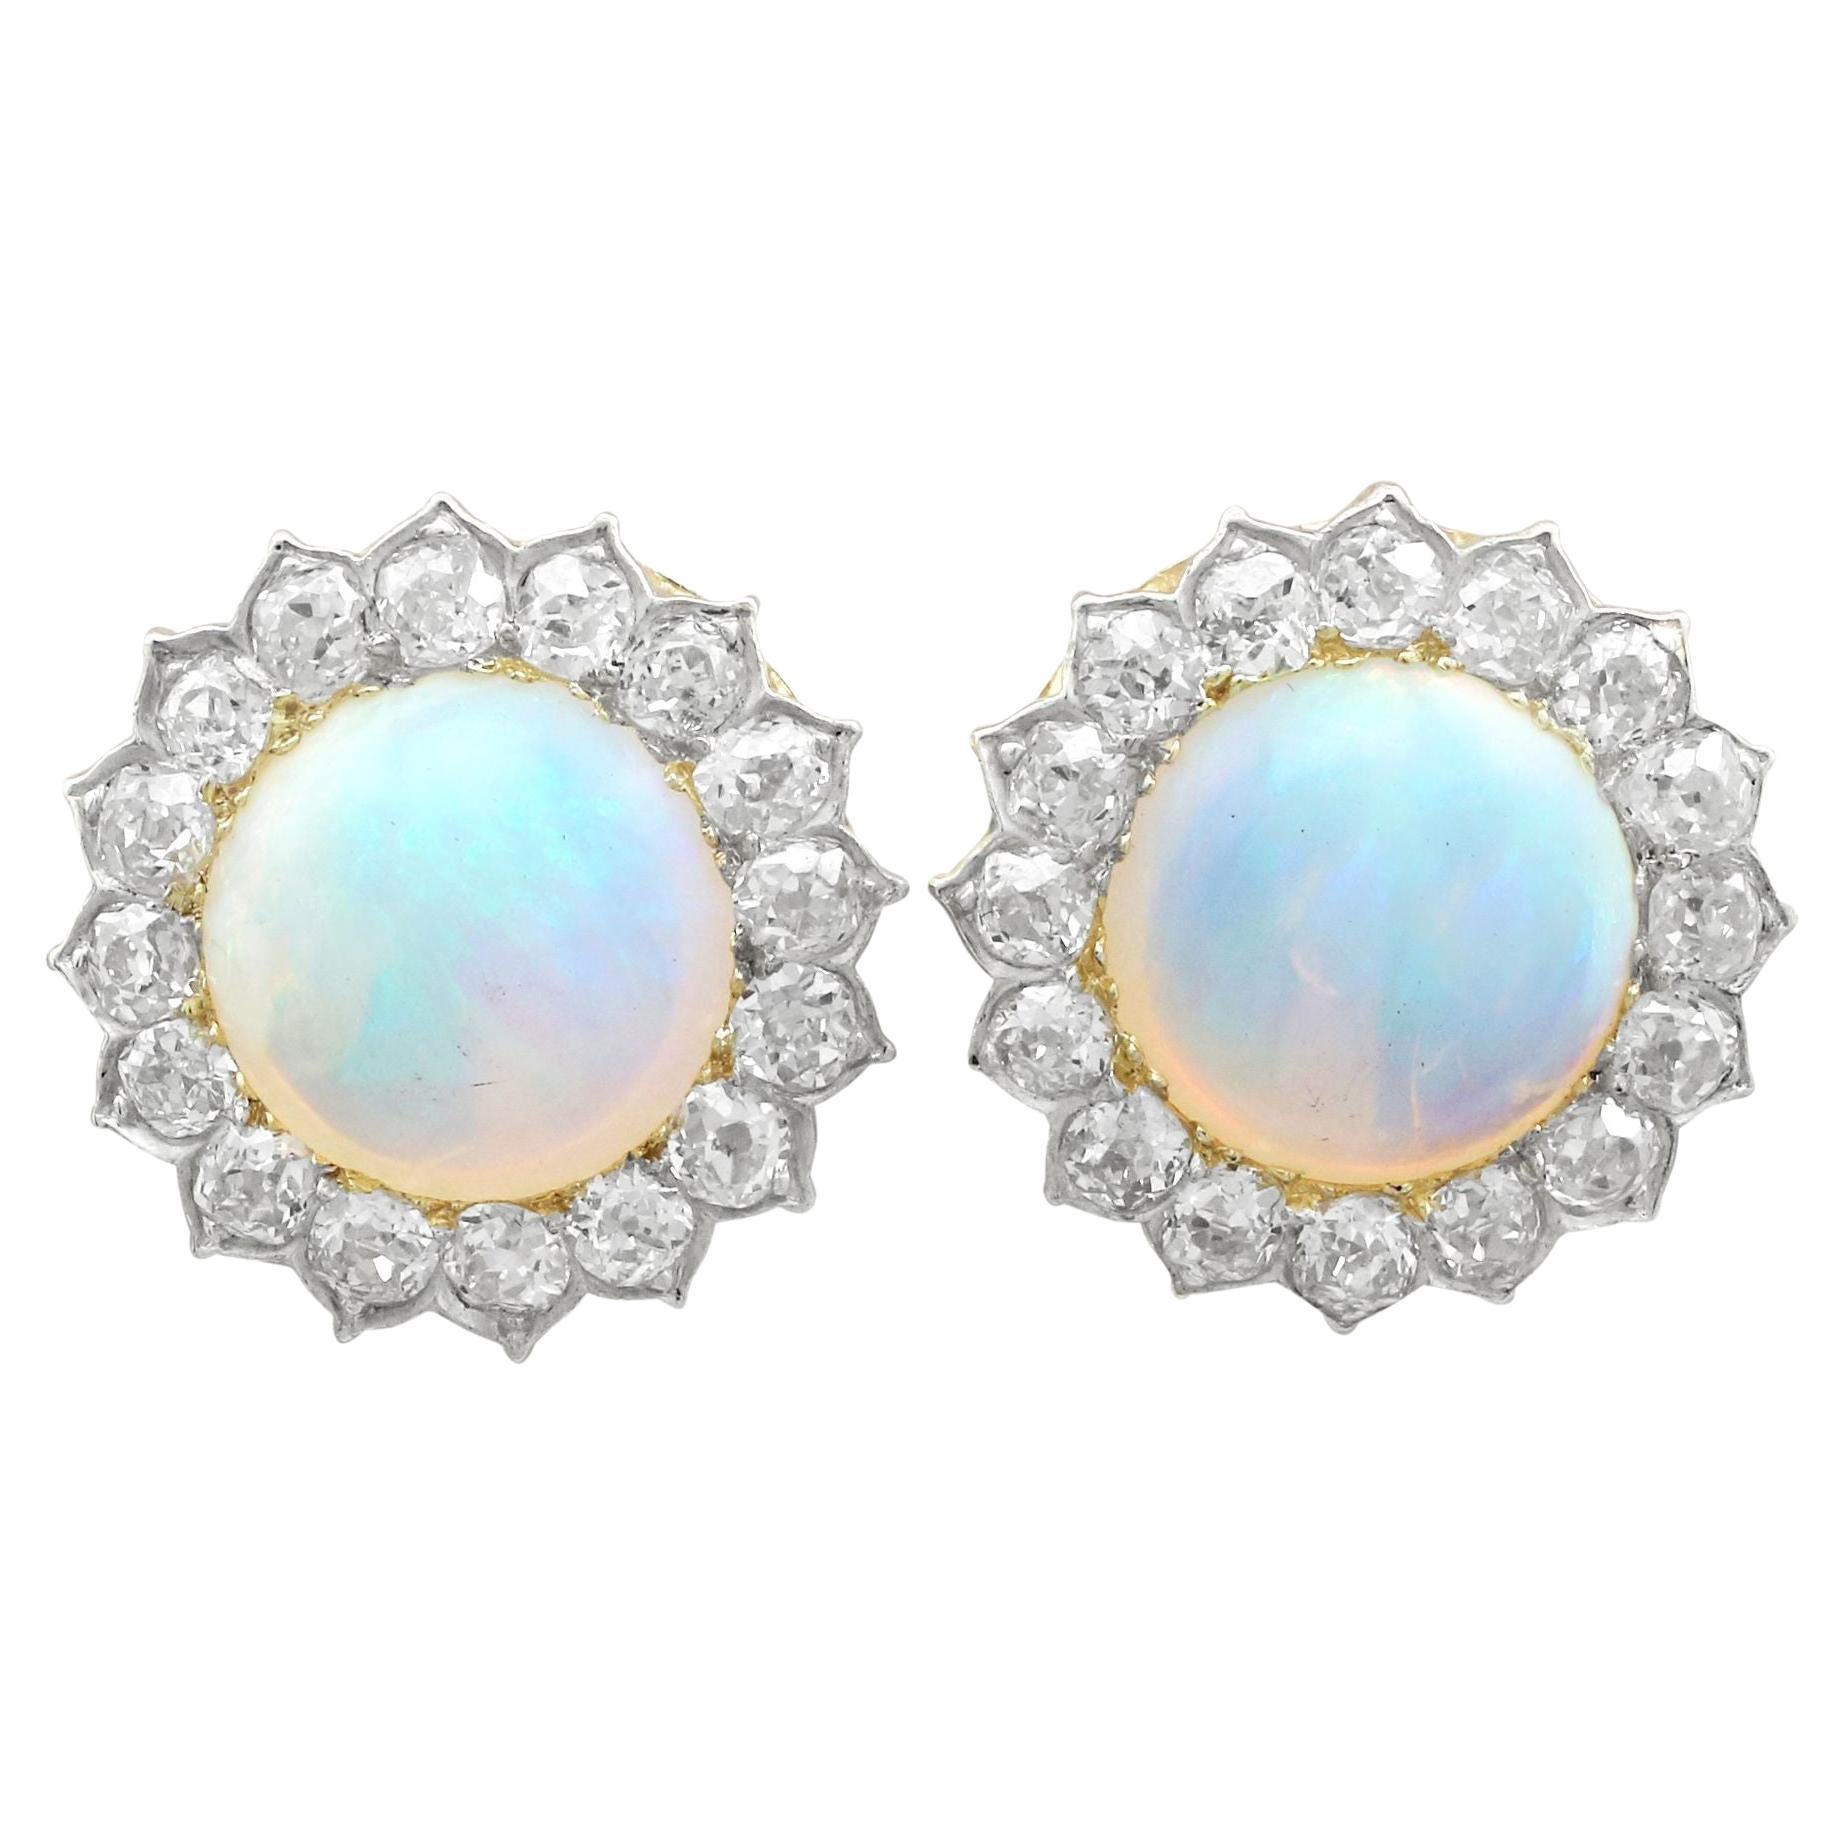 Victorian 7.76Ct Cabochon Cut Opal and 2.05 Carat Diamond Yellow Gold Earrings For Sale